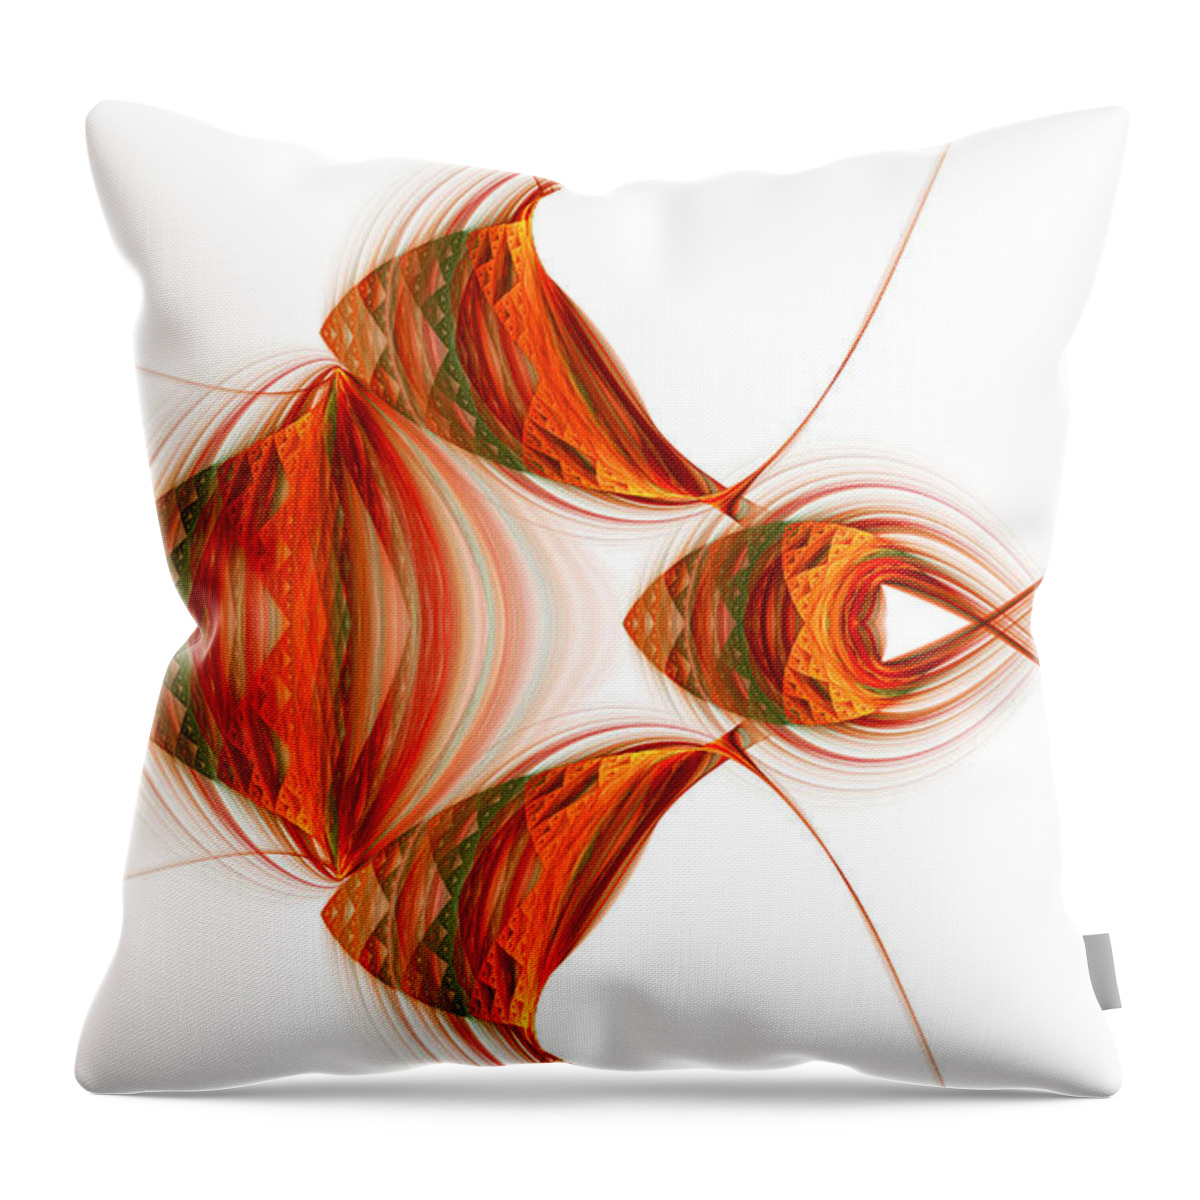 Fractal Throw Pillow featuring the digital art Four Fractal Fishies by Richard Ortolano